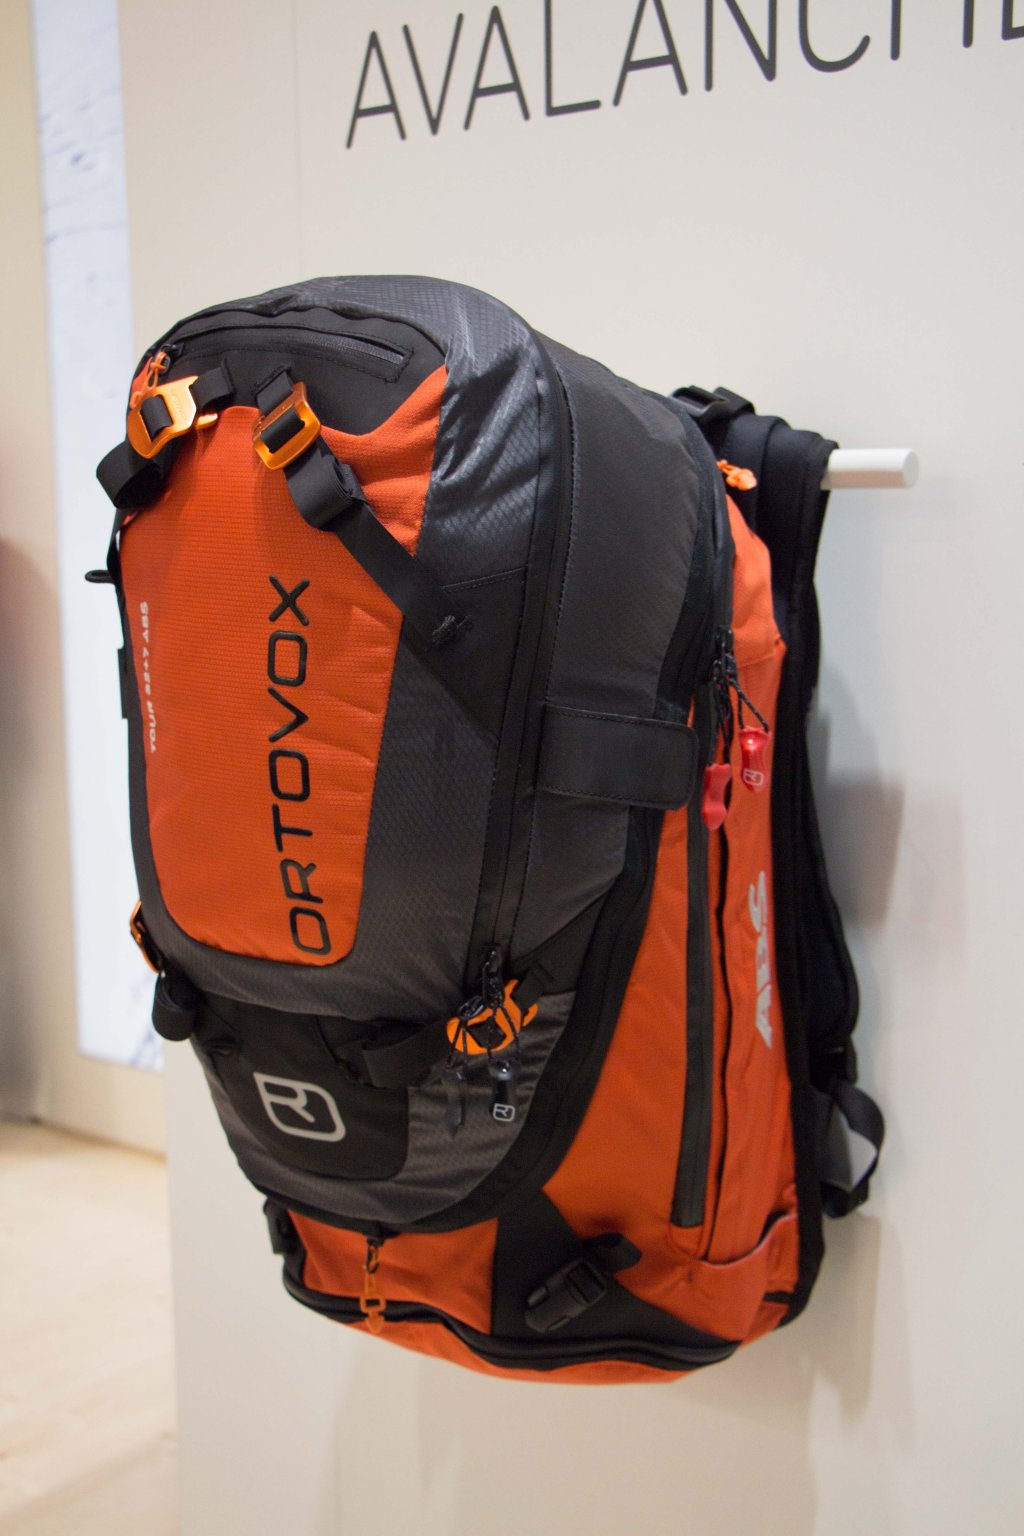 Ortovox avalanche airbag backpack